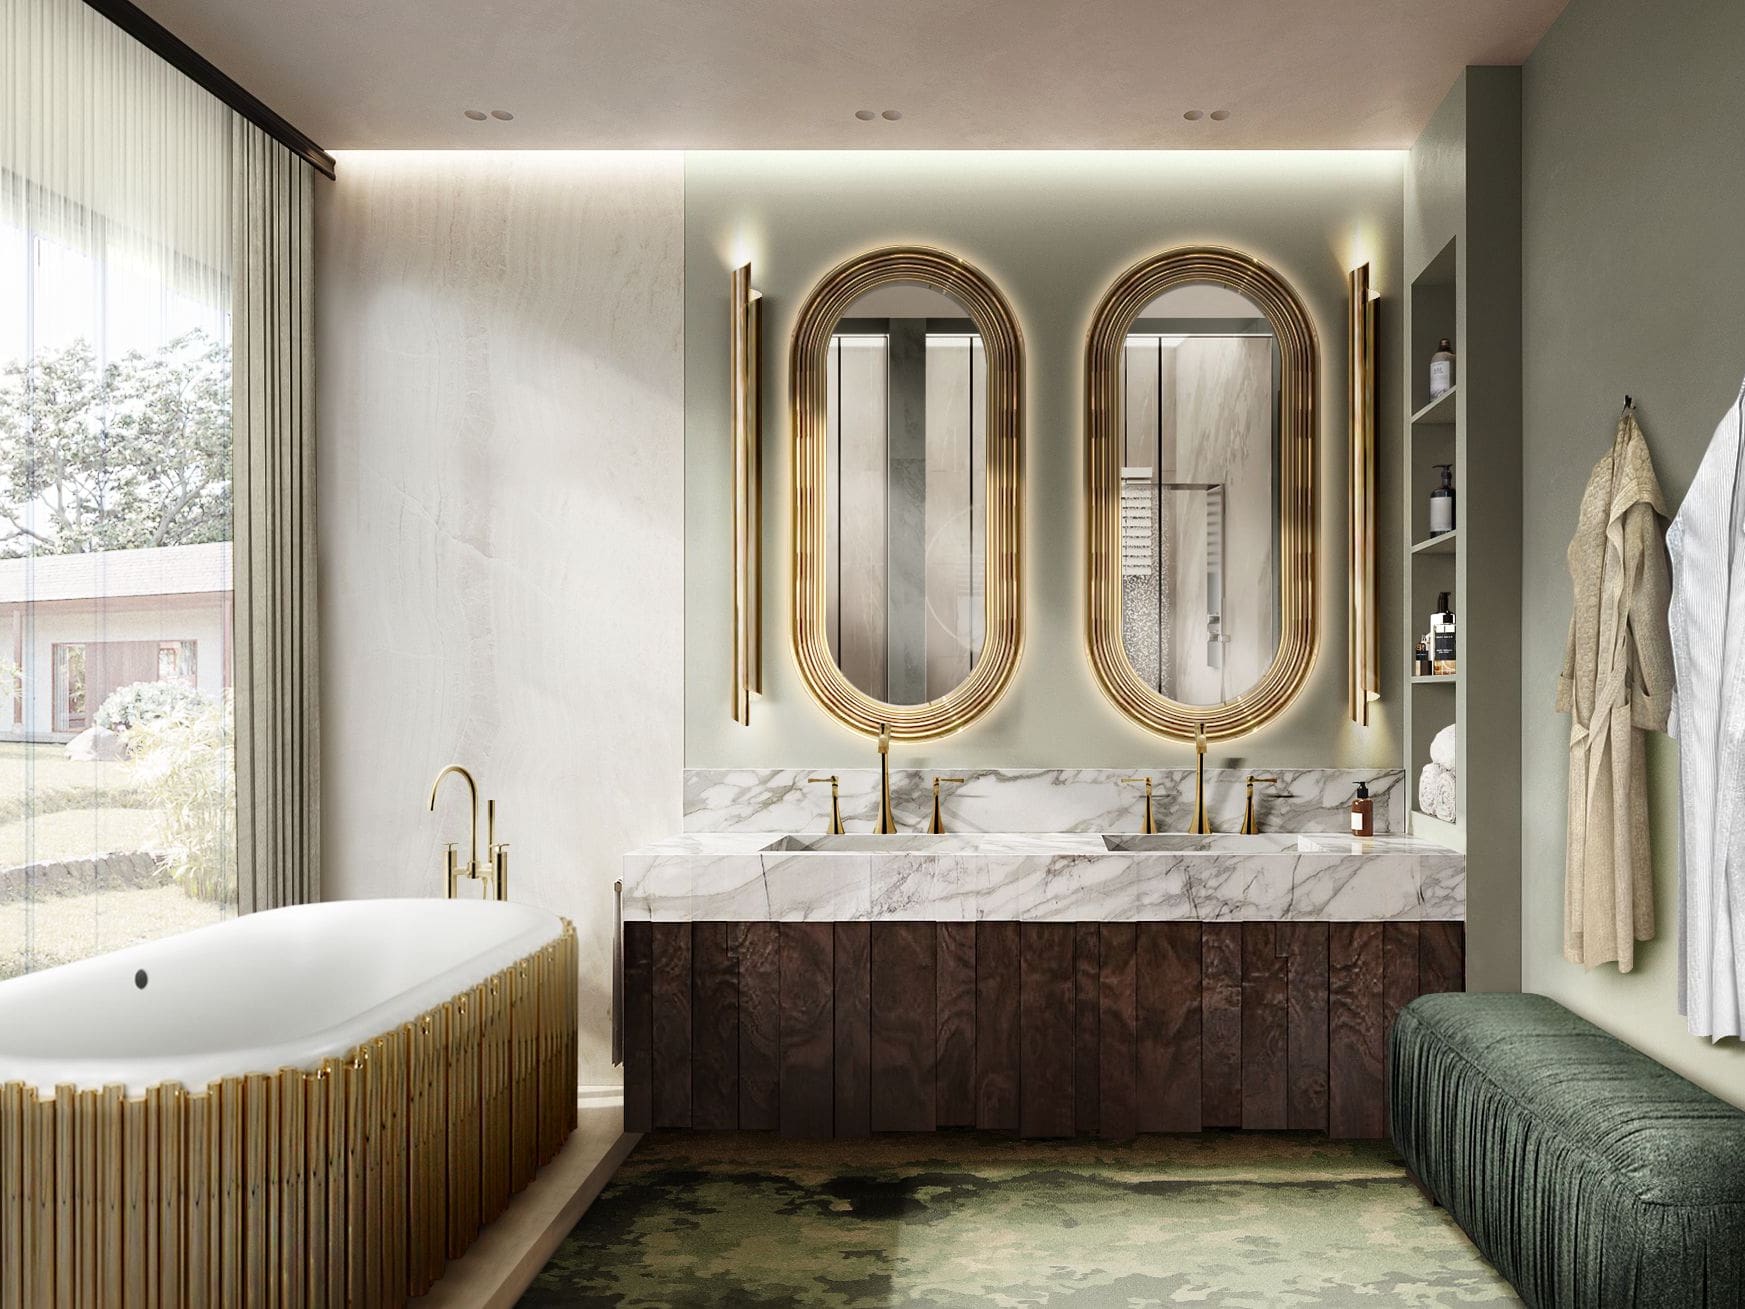 Luxury Bathroom Design Made Of Gold-Plated Brass - Home'Society